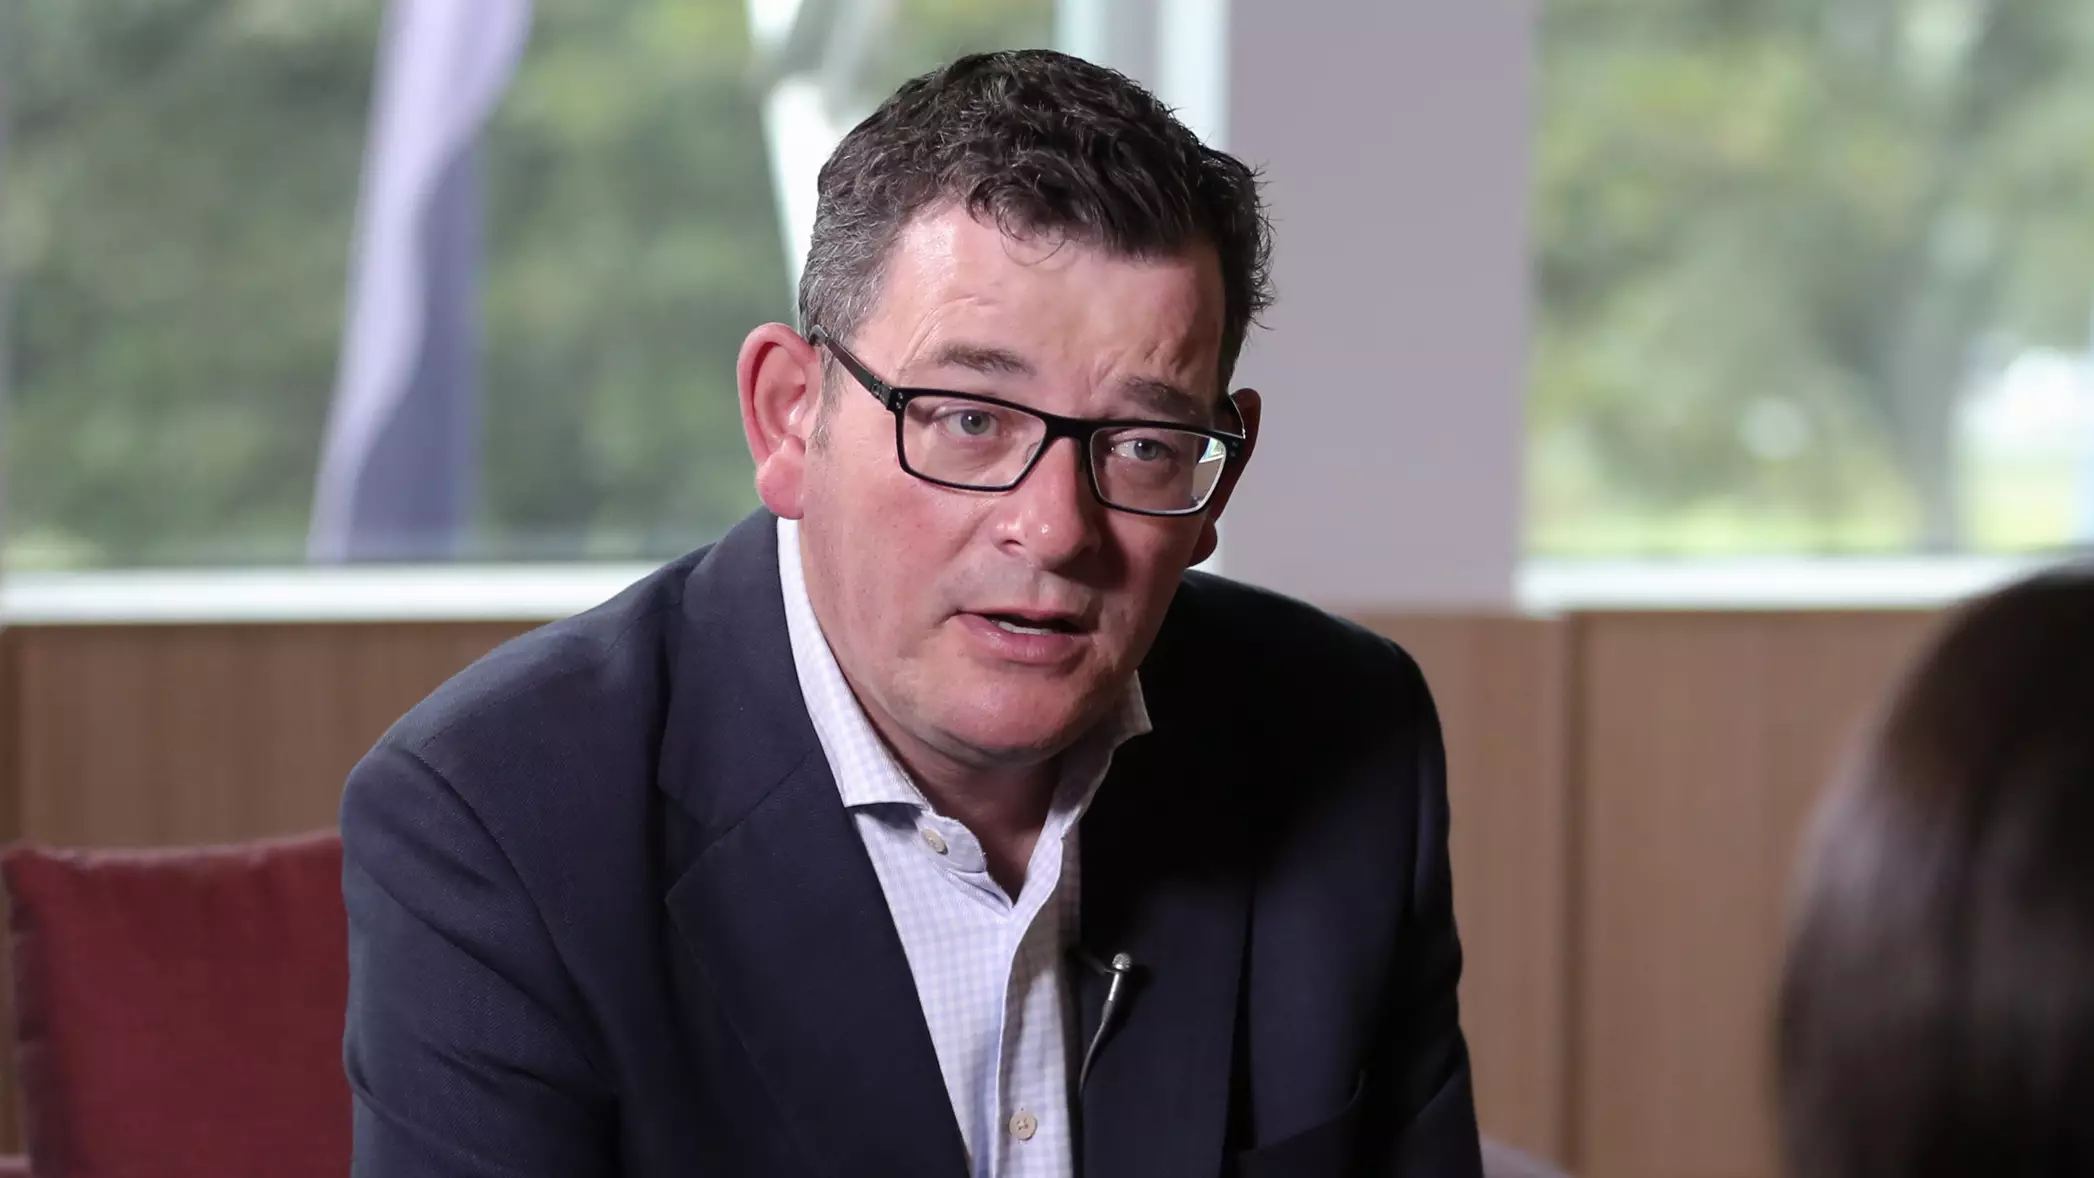 Majority Of Victorians Believe Daniel Andrews Has Done A Good Job During Covid-19 Second Wave